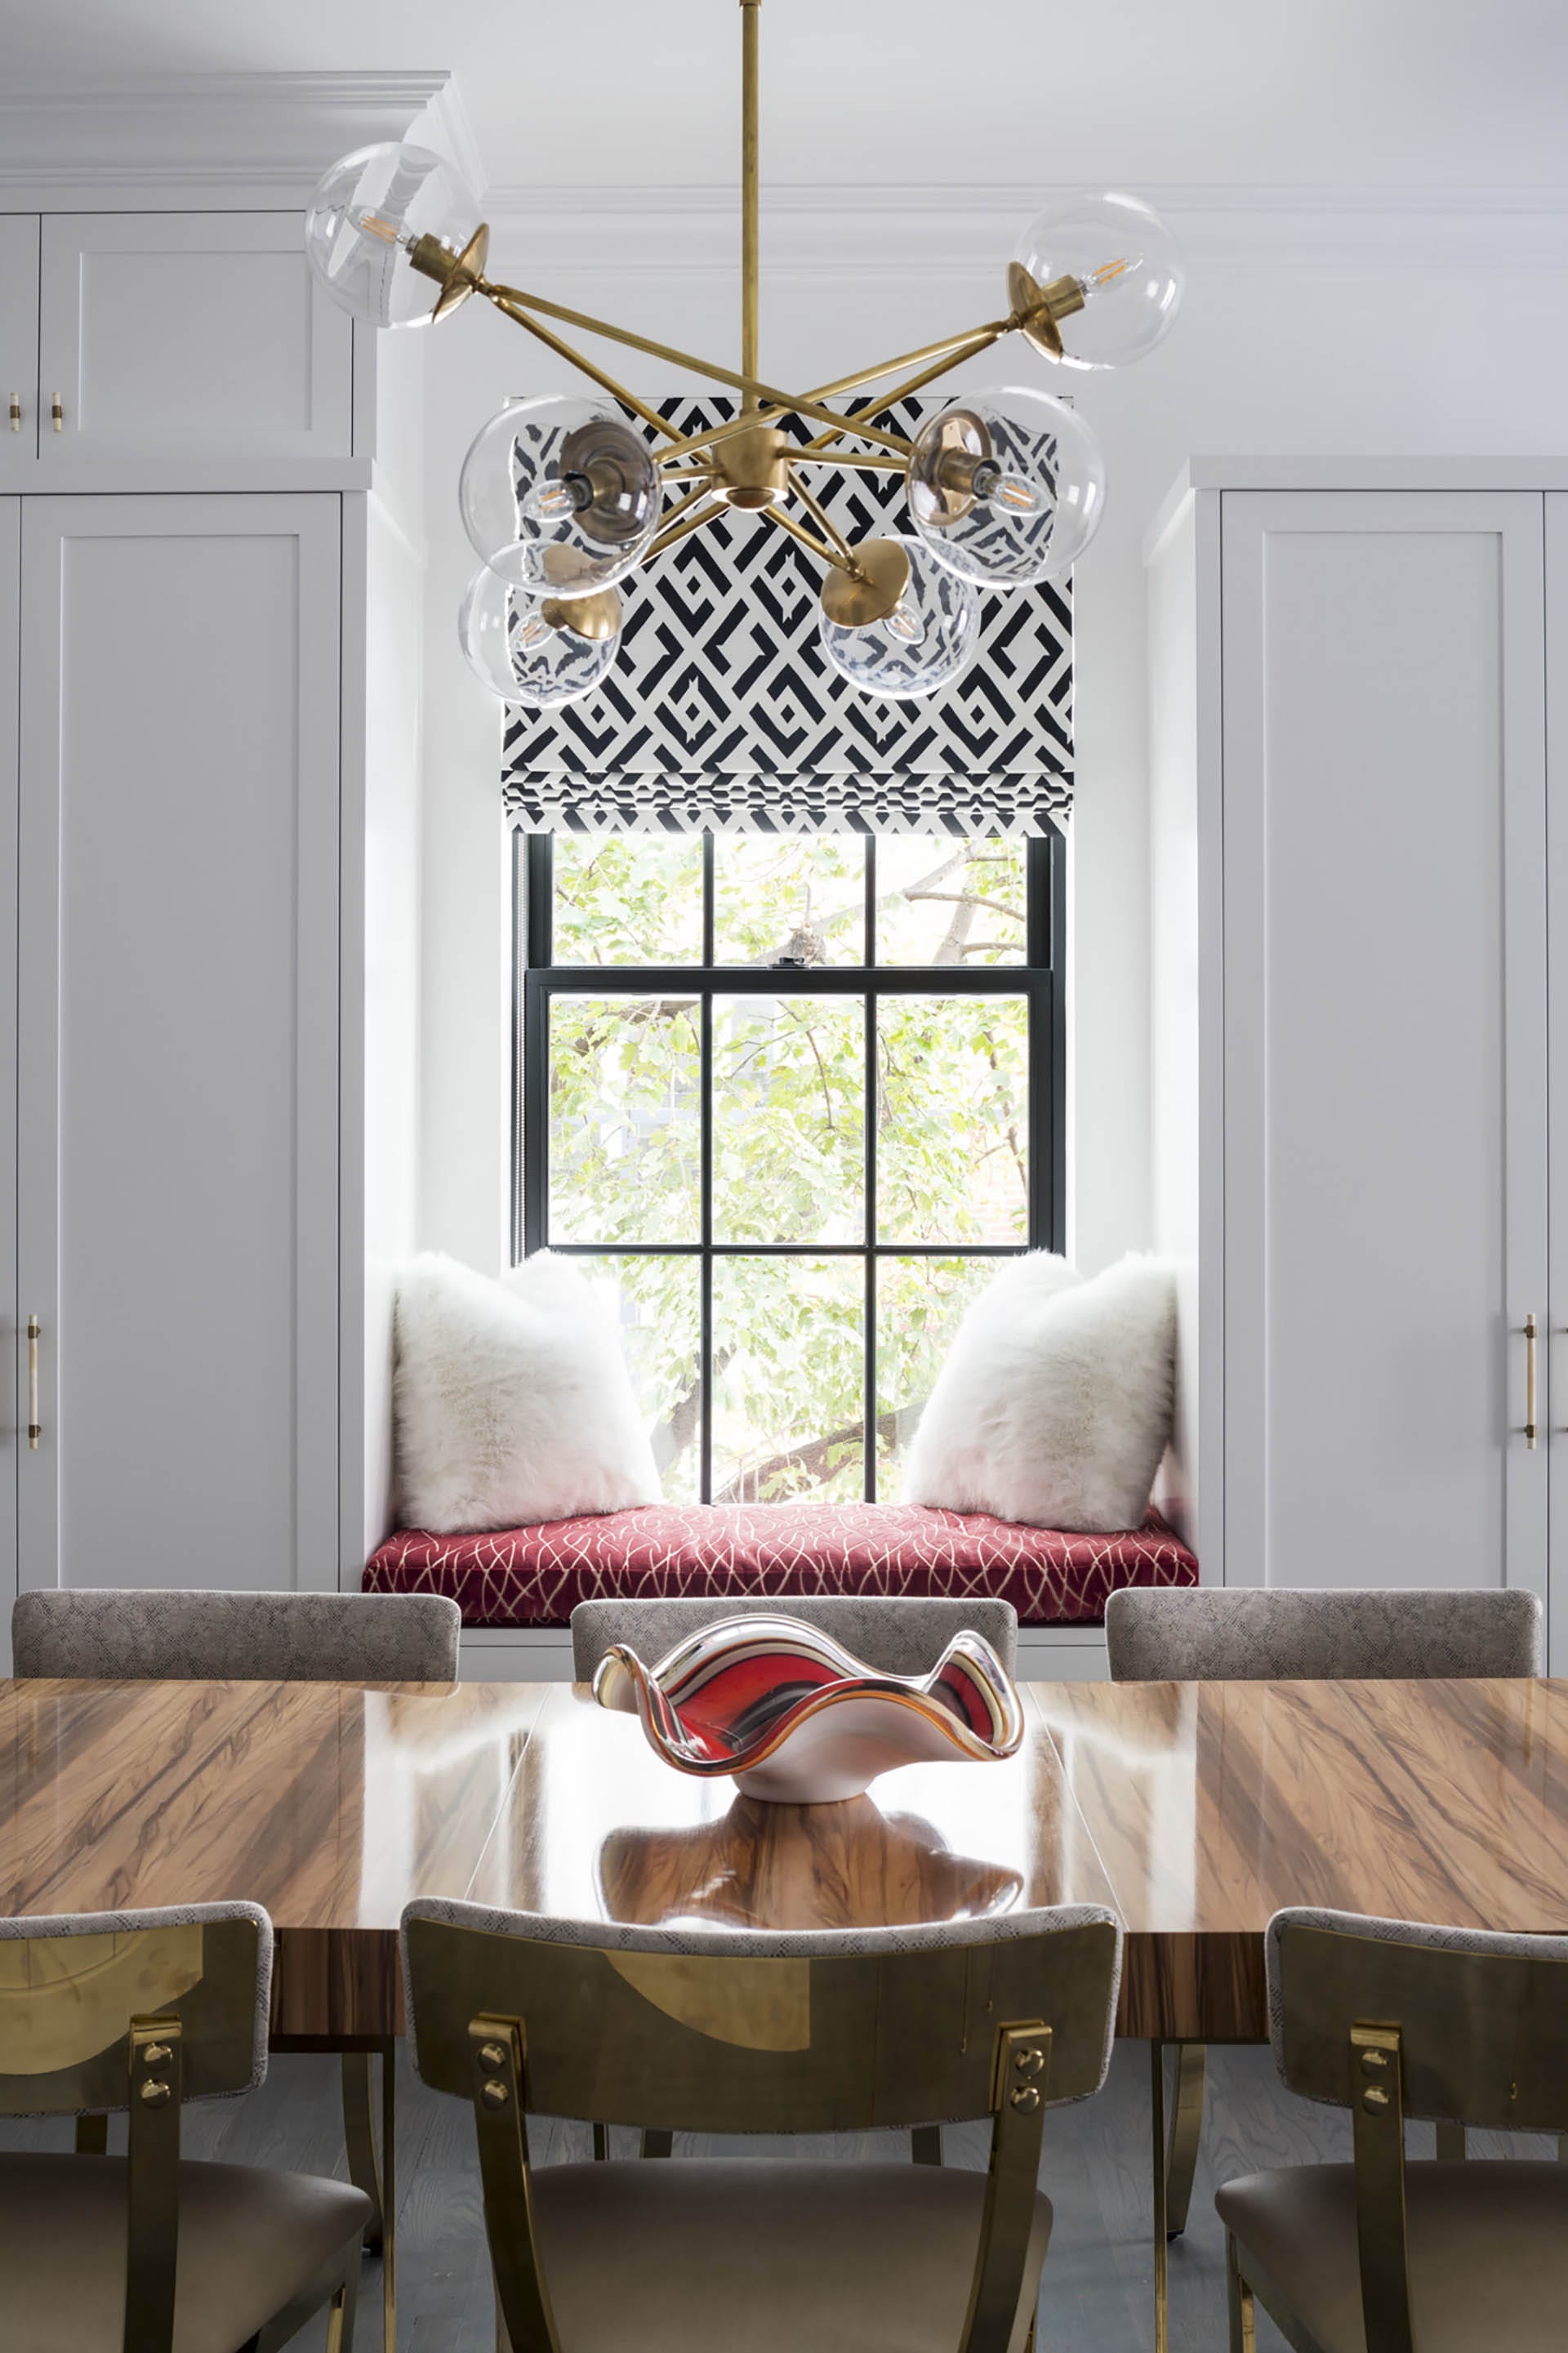 Brooklyn Heights dining room with a wood table, klismos chairs, a gold chandelier, and black and white Roman shades